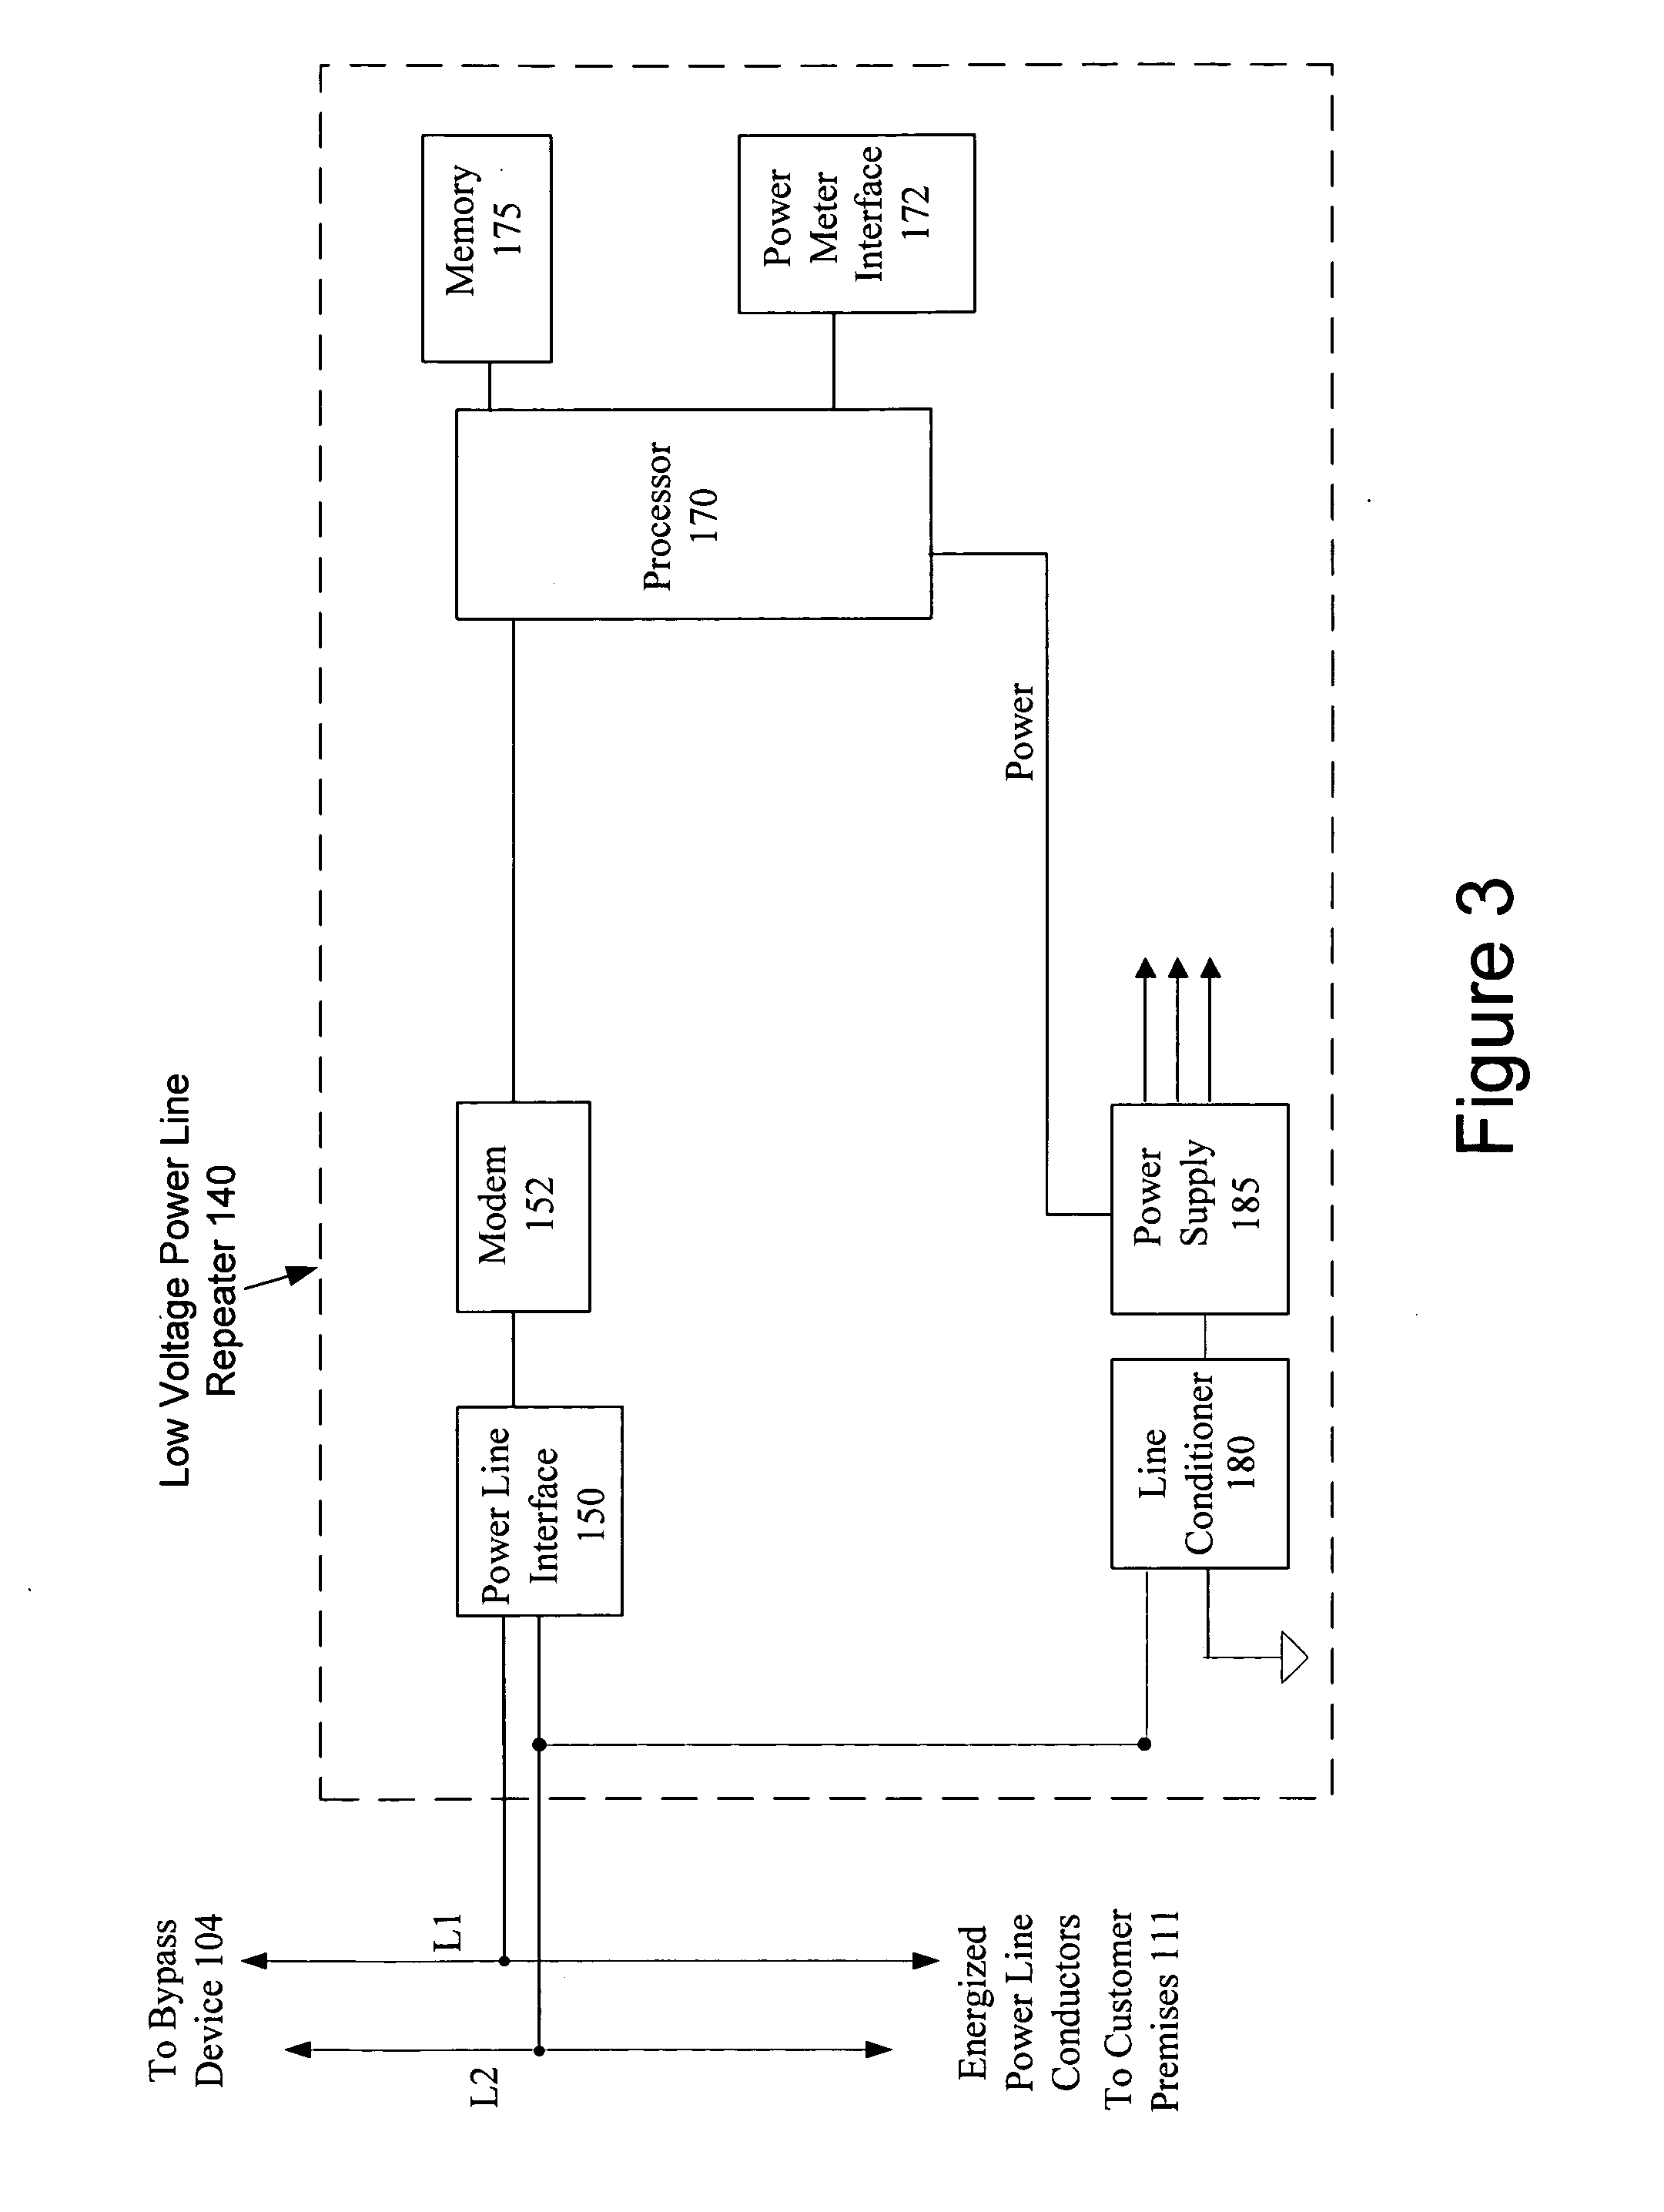 Power line communication device and method